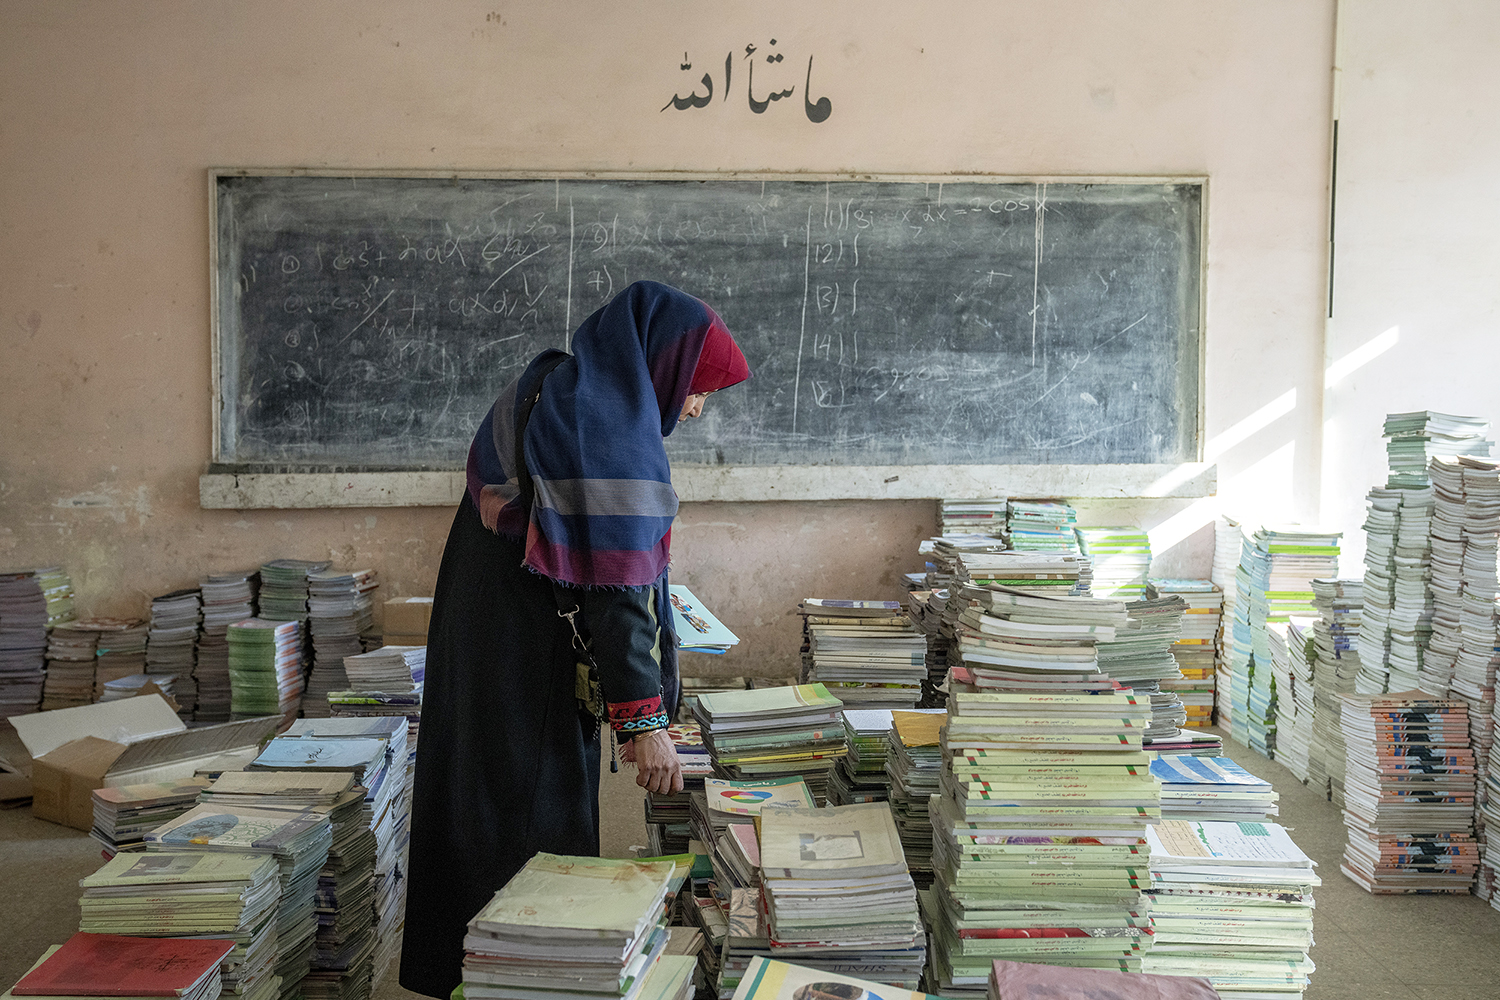 Amanah Nashenas, an Afghan teacher, collects books in a school in Kabul, Afghanistan, Dec. 22, 2022. The country’s Taliban rulers earlier in the week ordered women nationwide to stop attending private and public universities effective immediately and until further notice. They also banned girls from middle school and high school, barred women from most fields of employment and ordered them to wear head-to-toe clothing in public. Women are also banned from parks and gyms. (AP Photo/Ebrahim Noroozi)